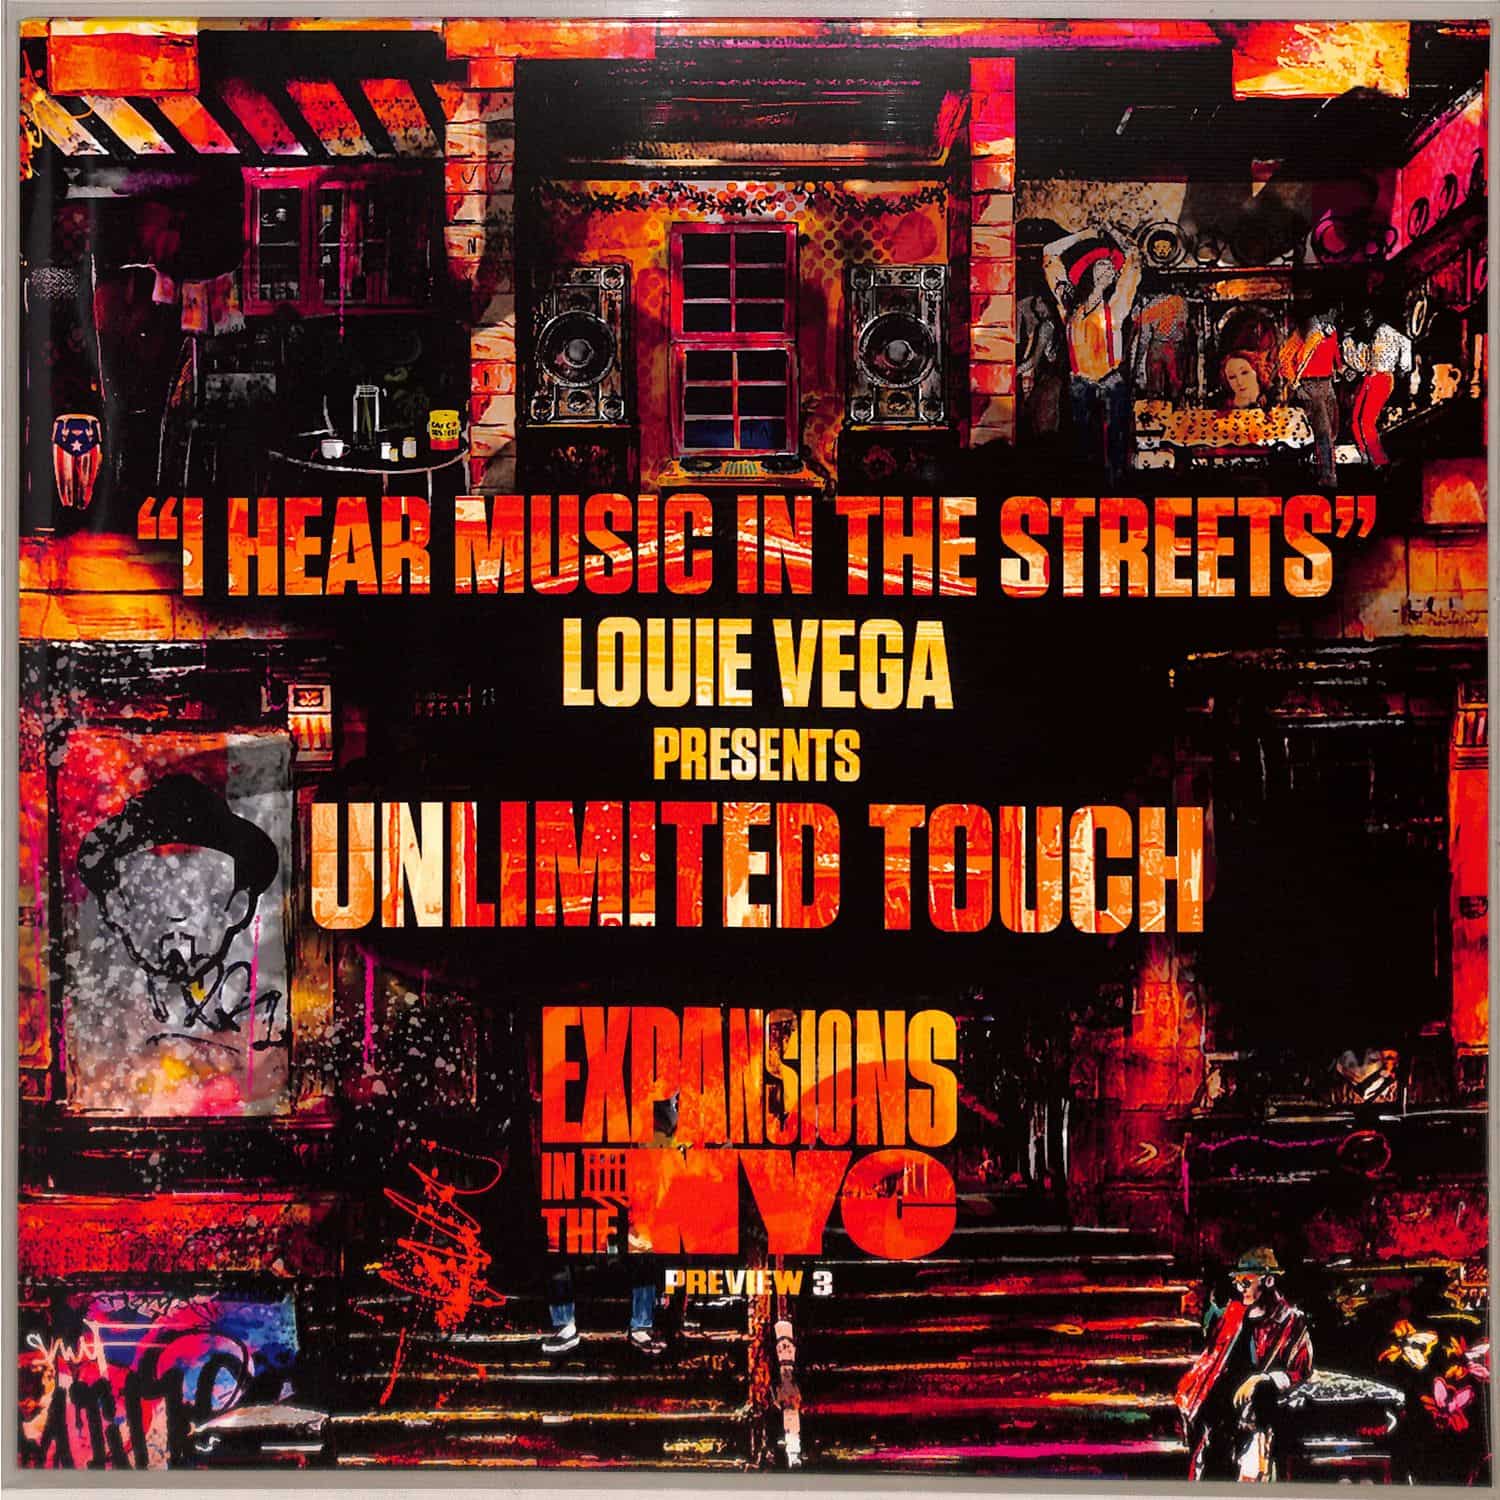 Louie Vega presents Unlimited Touch - I HEAR MUSIC IN THE STREETS